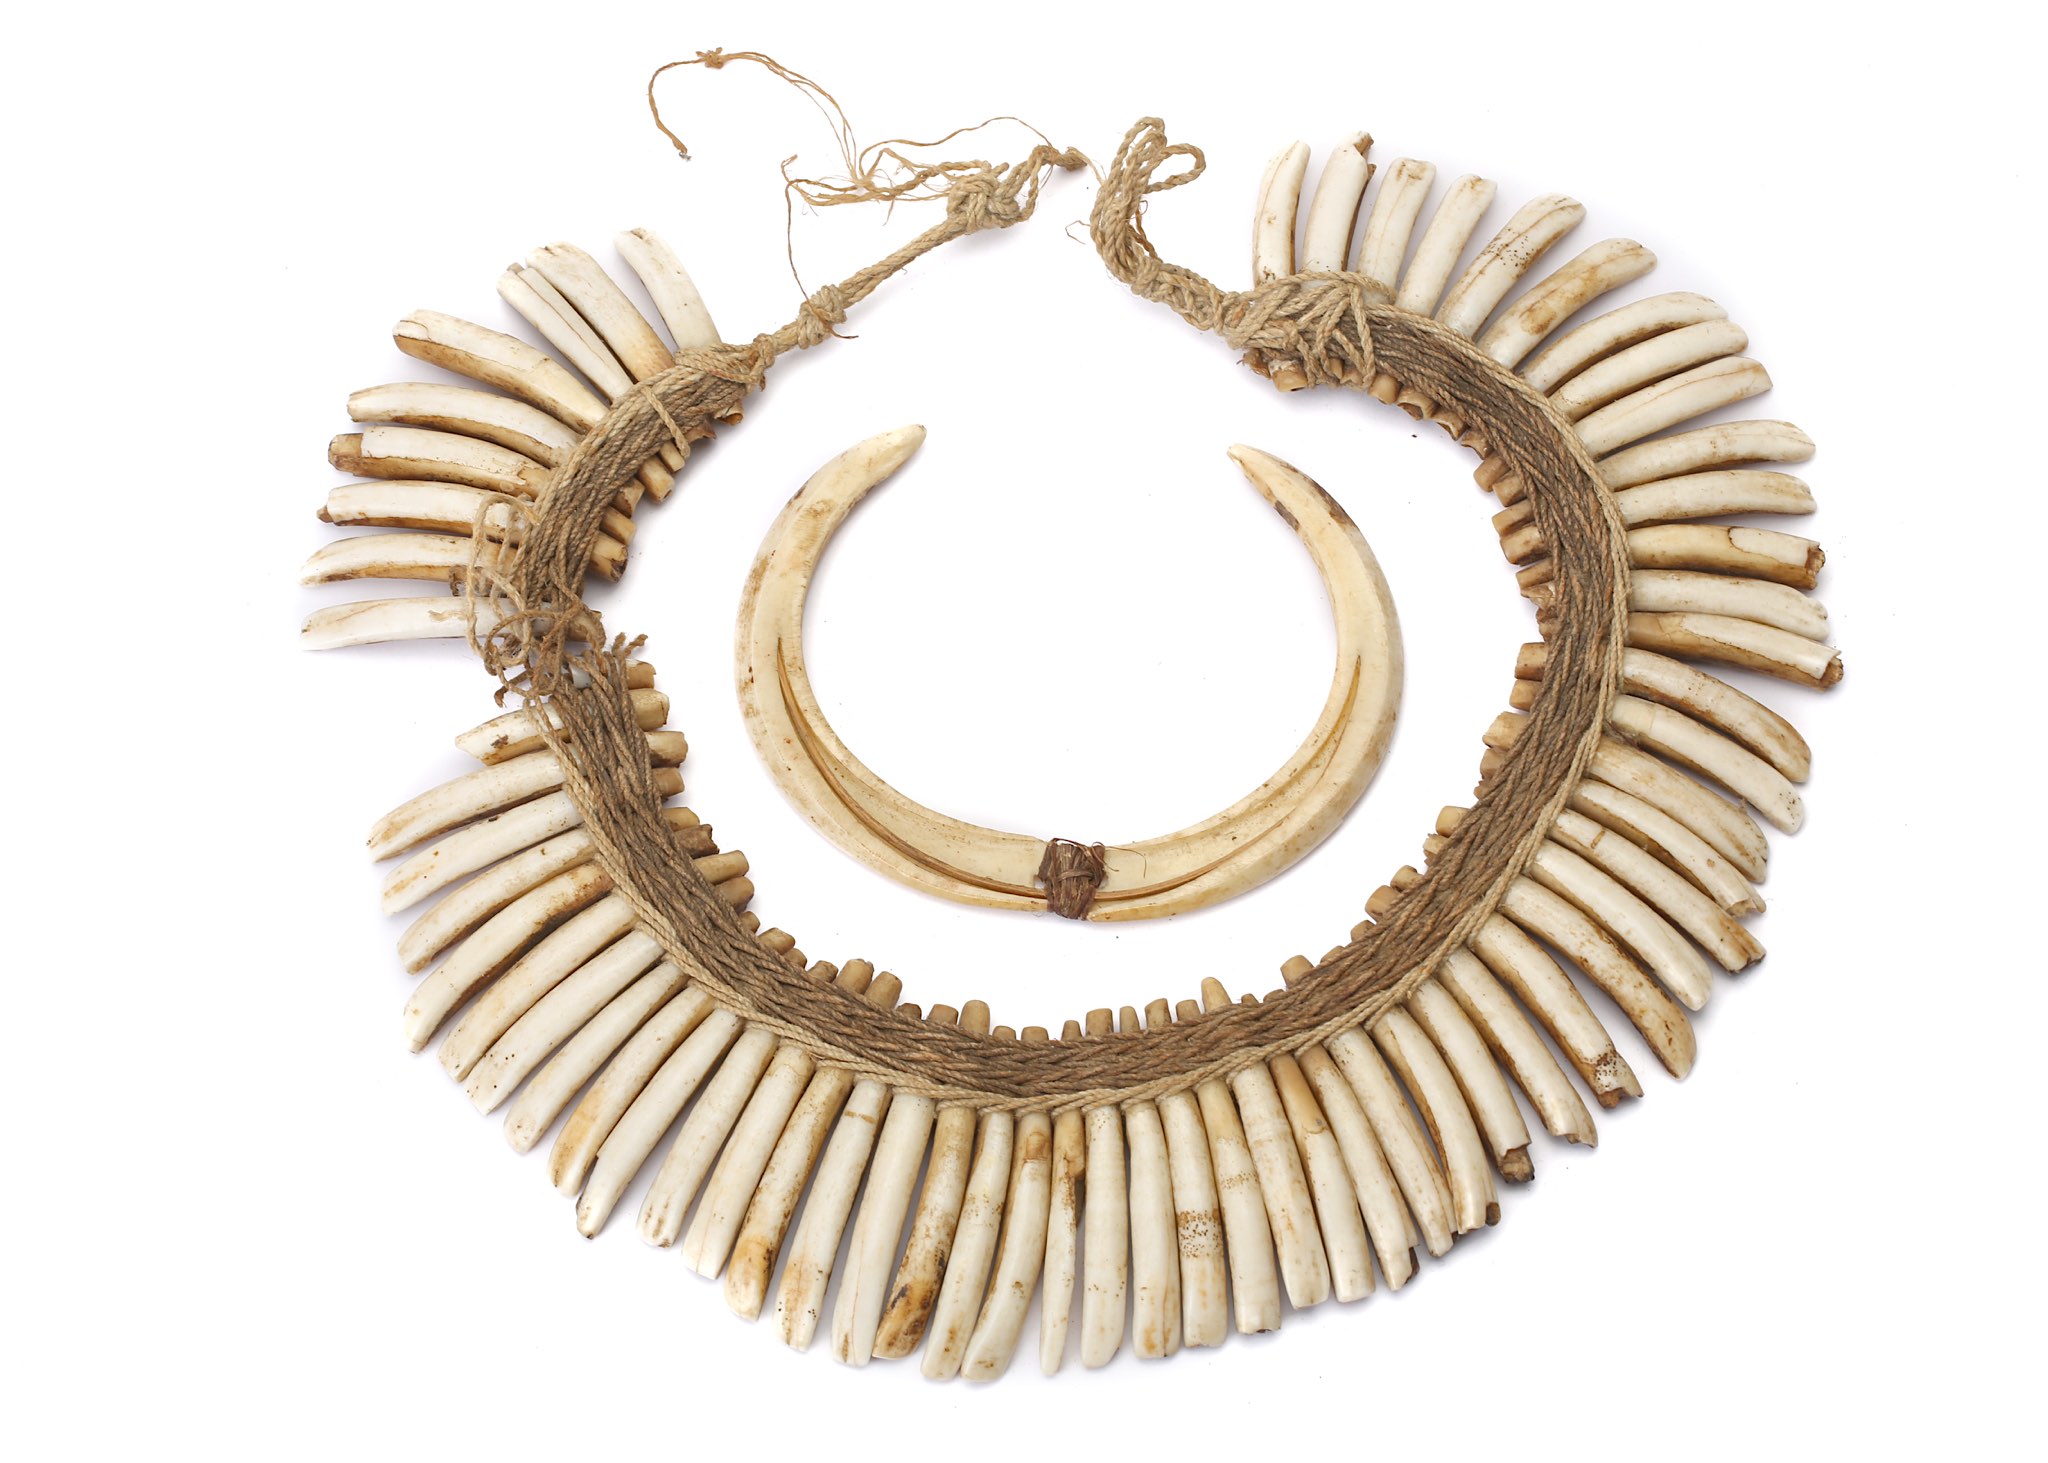 A KOROWAI NOSE PIECE AND WILD BOAR TOOTH NECKLACE The nose piece formed of two pieces of carved bone